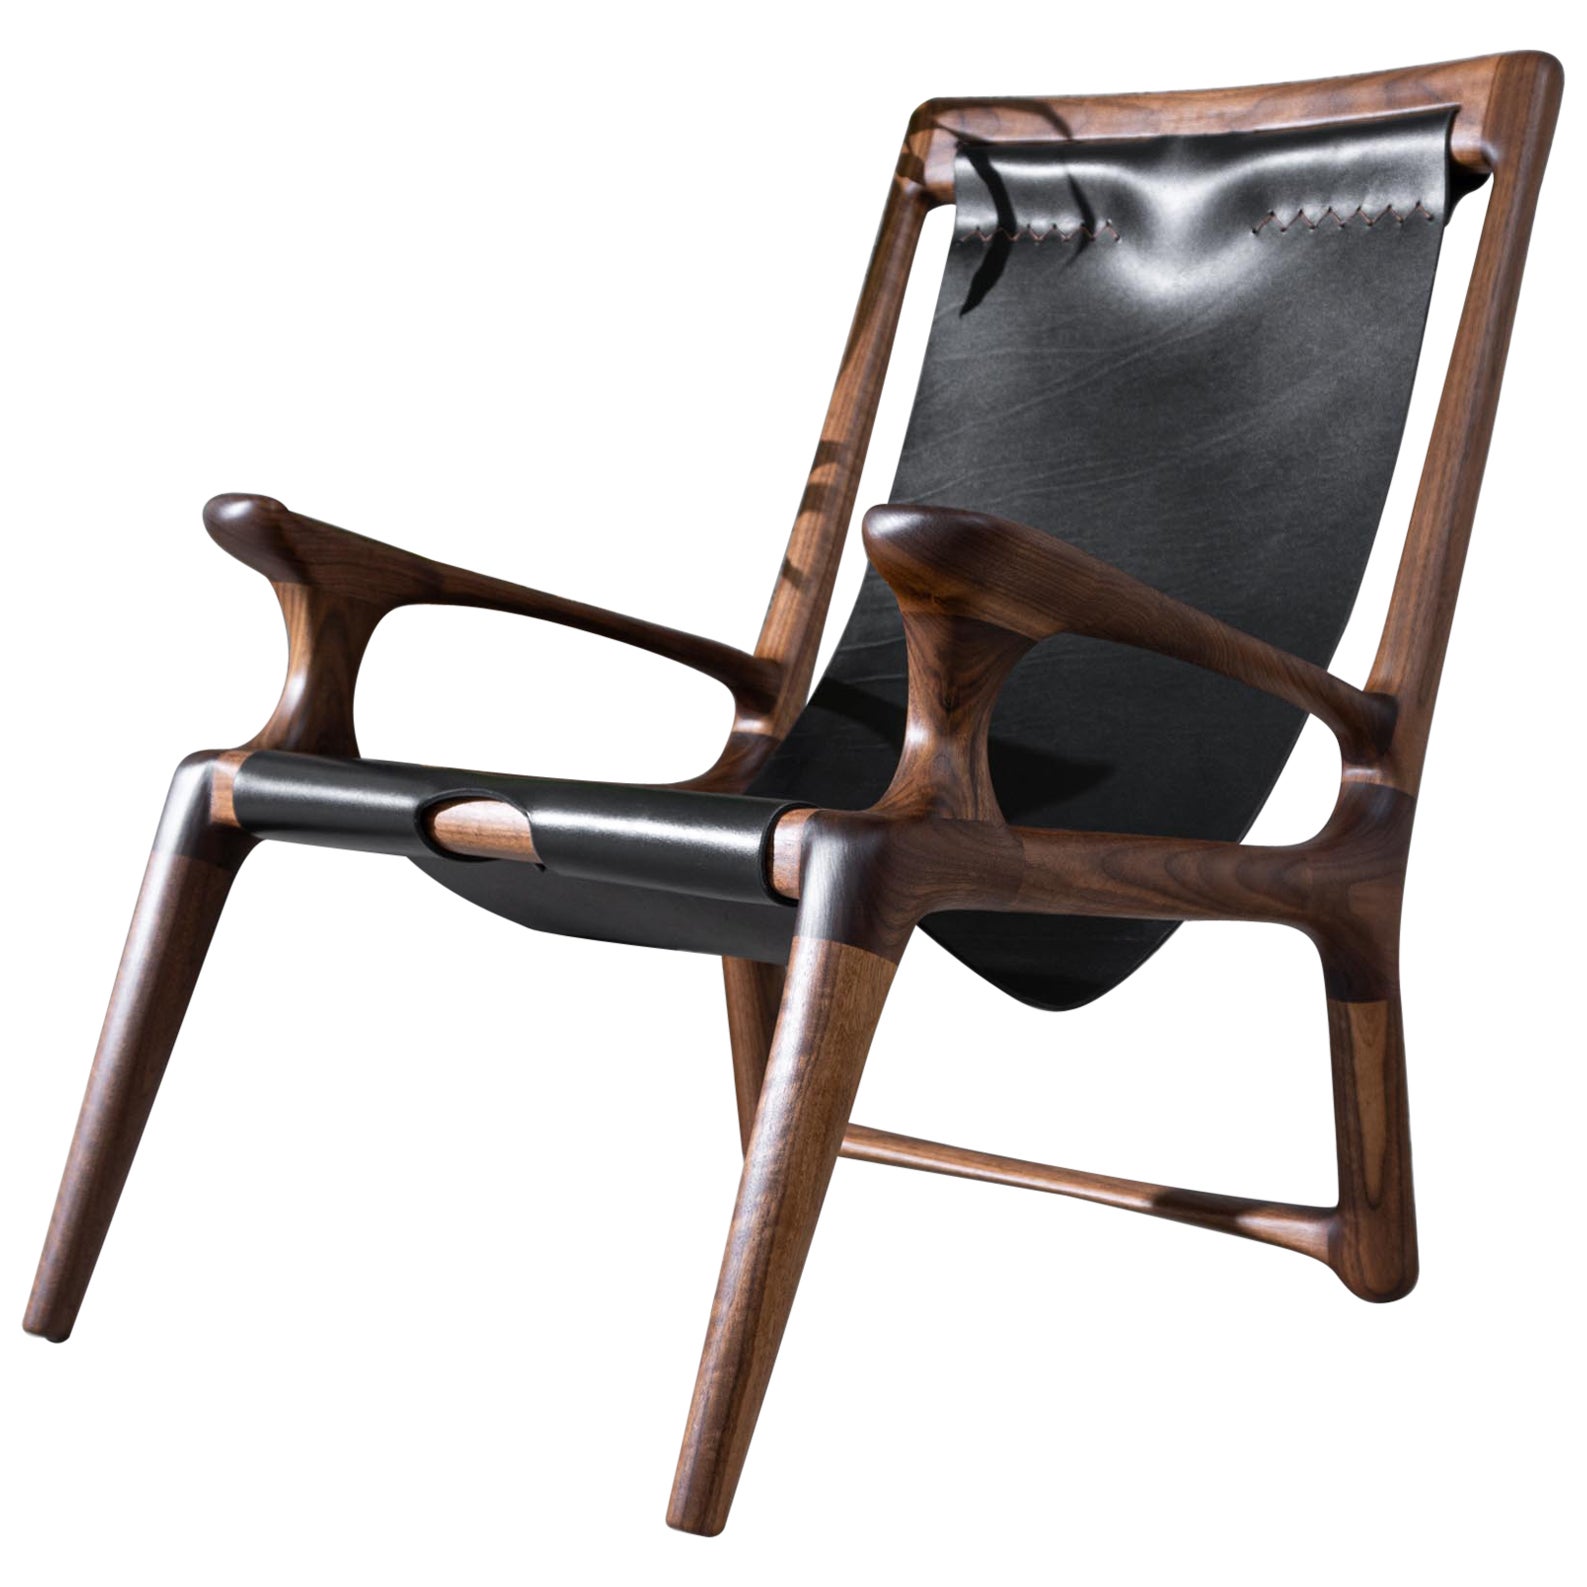 Walnut & Leather Sling Chair Mod 2 by Fernweh Woodworking